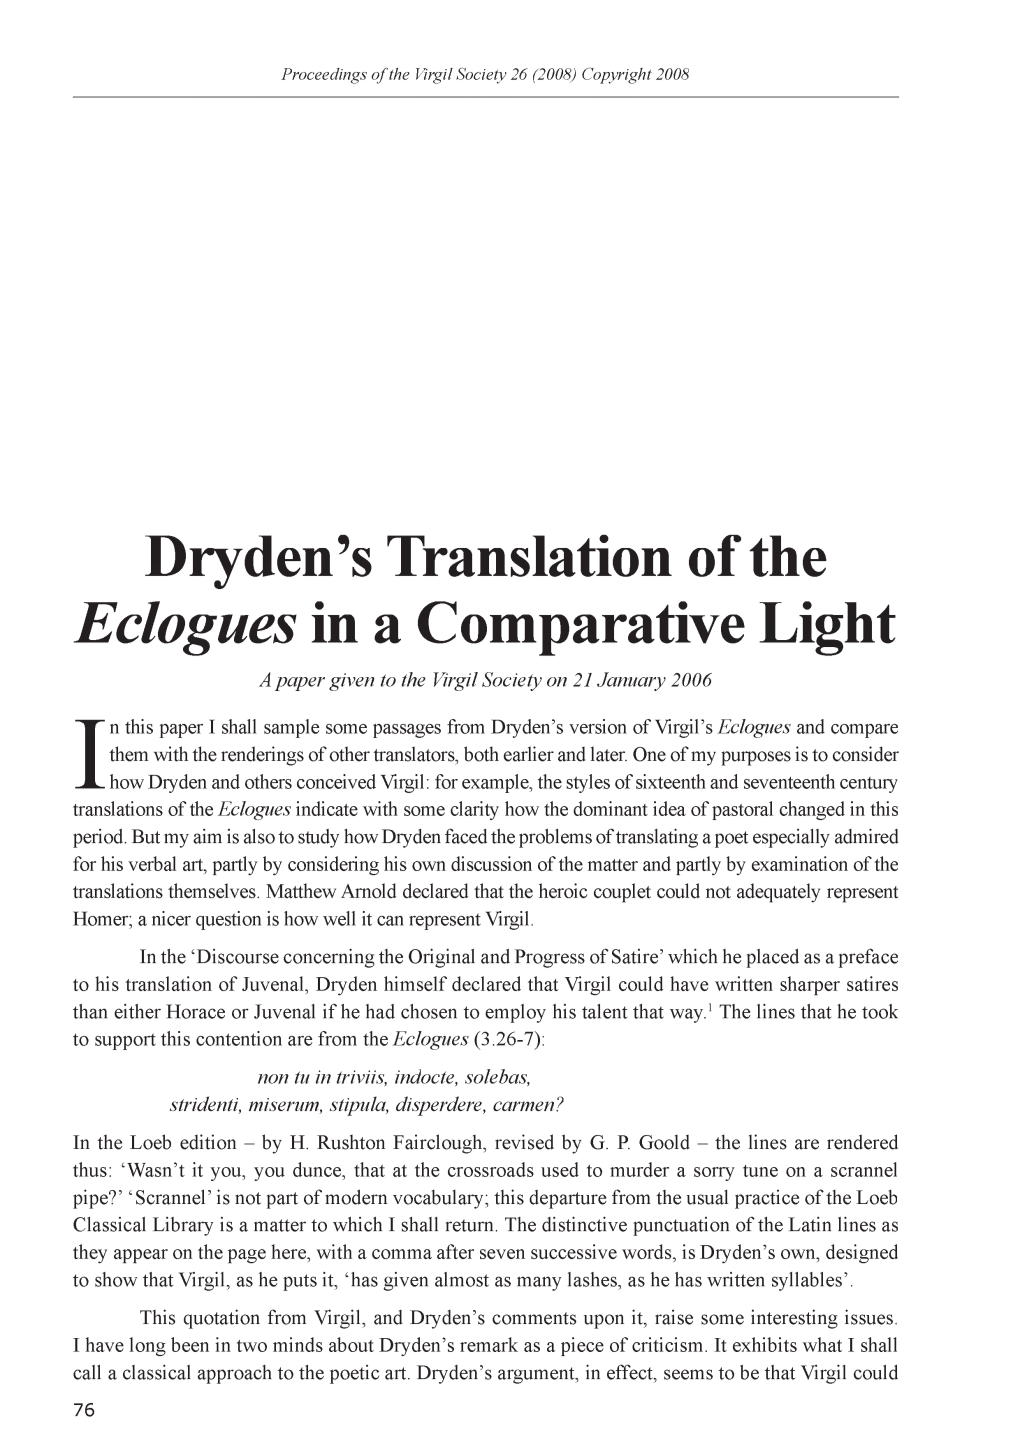 Dryden's Translation of the Eclogues in a Comparative Light